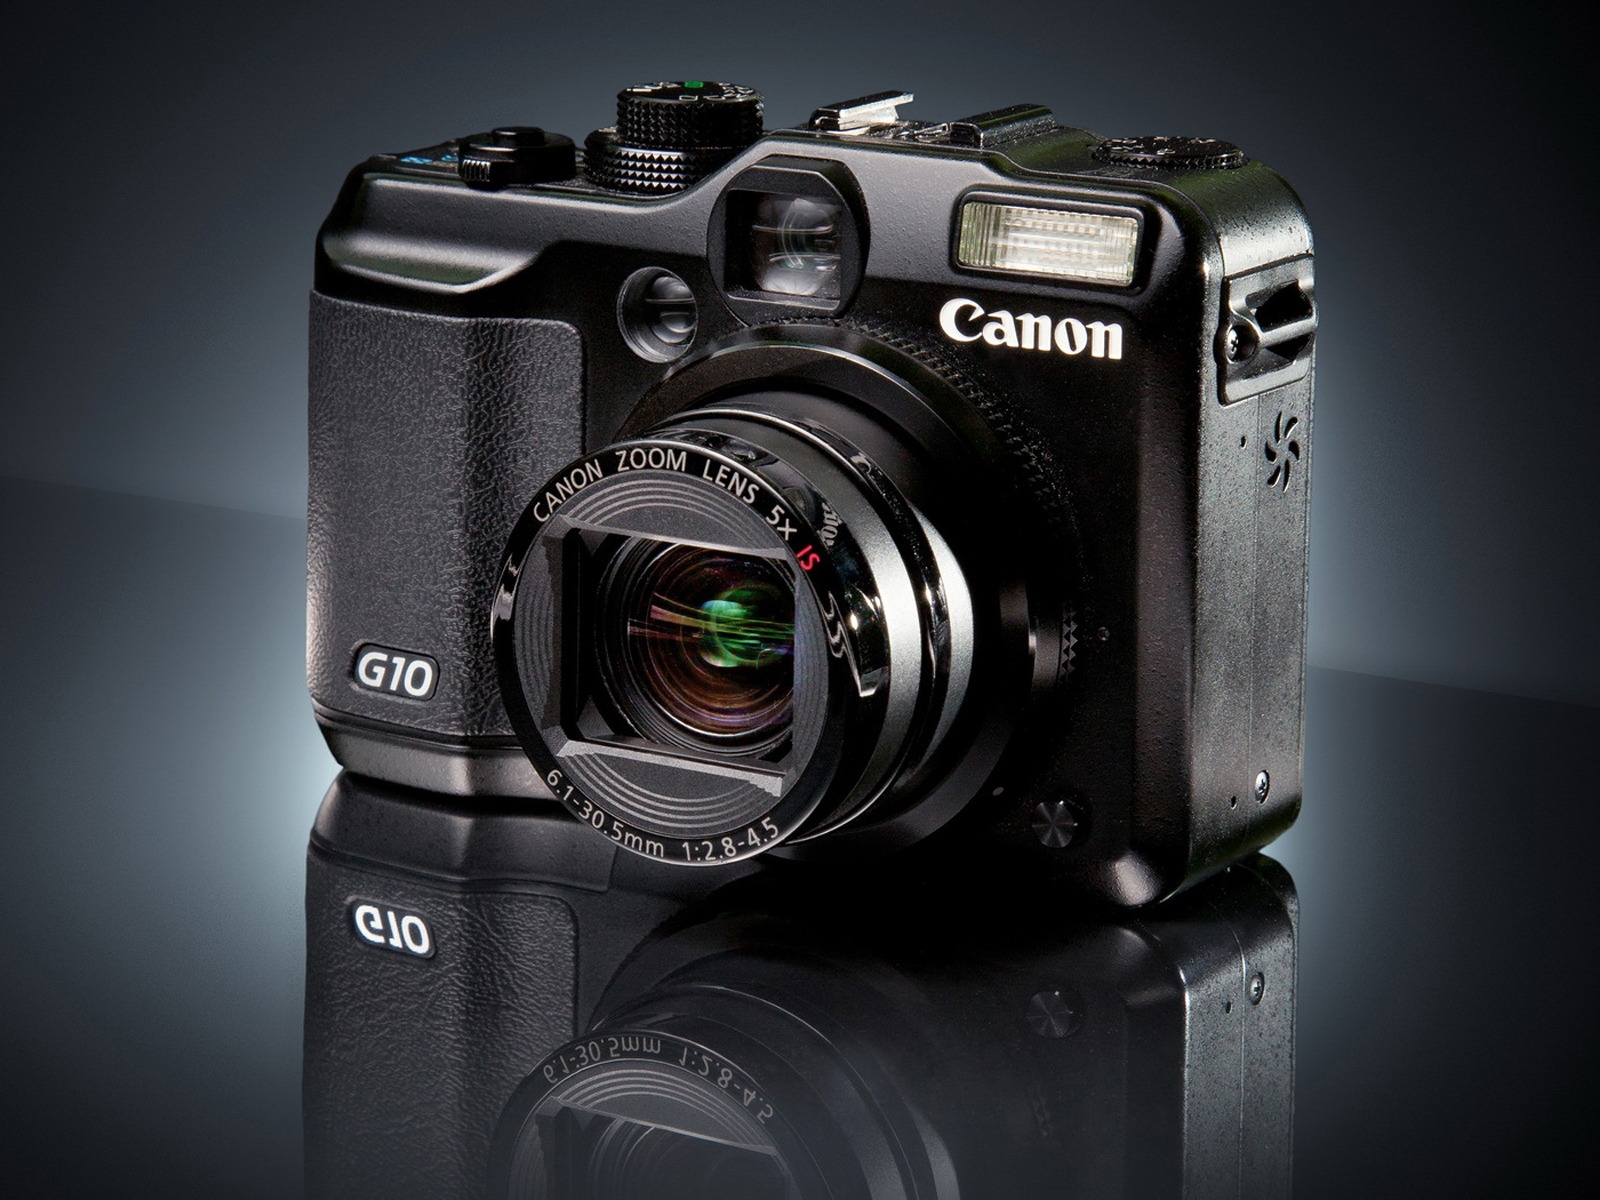 Canon G10 for 1600 x 1200 resolution